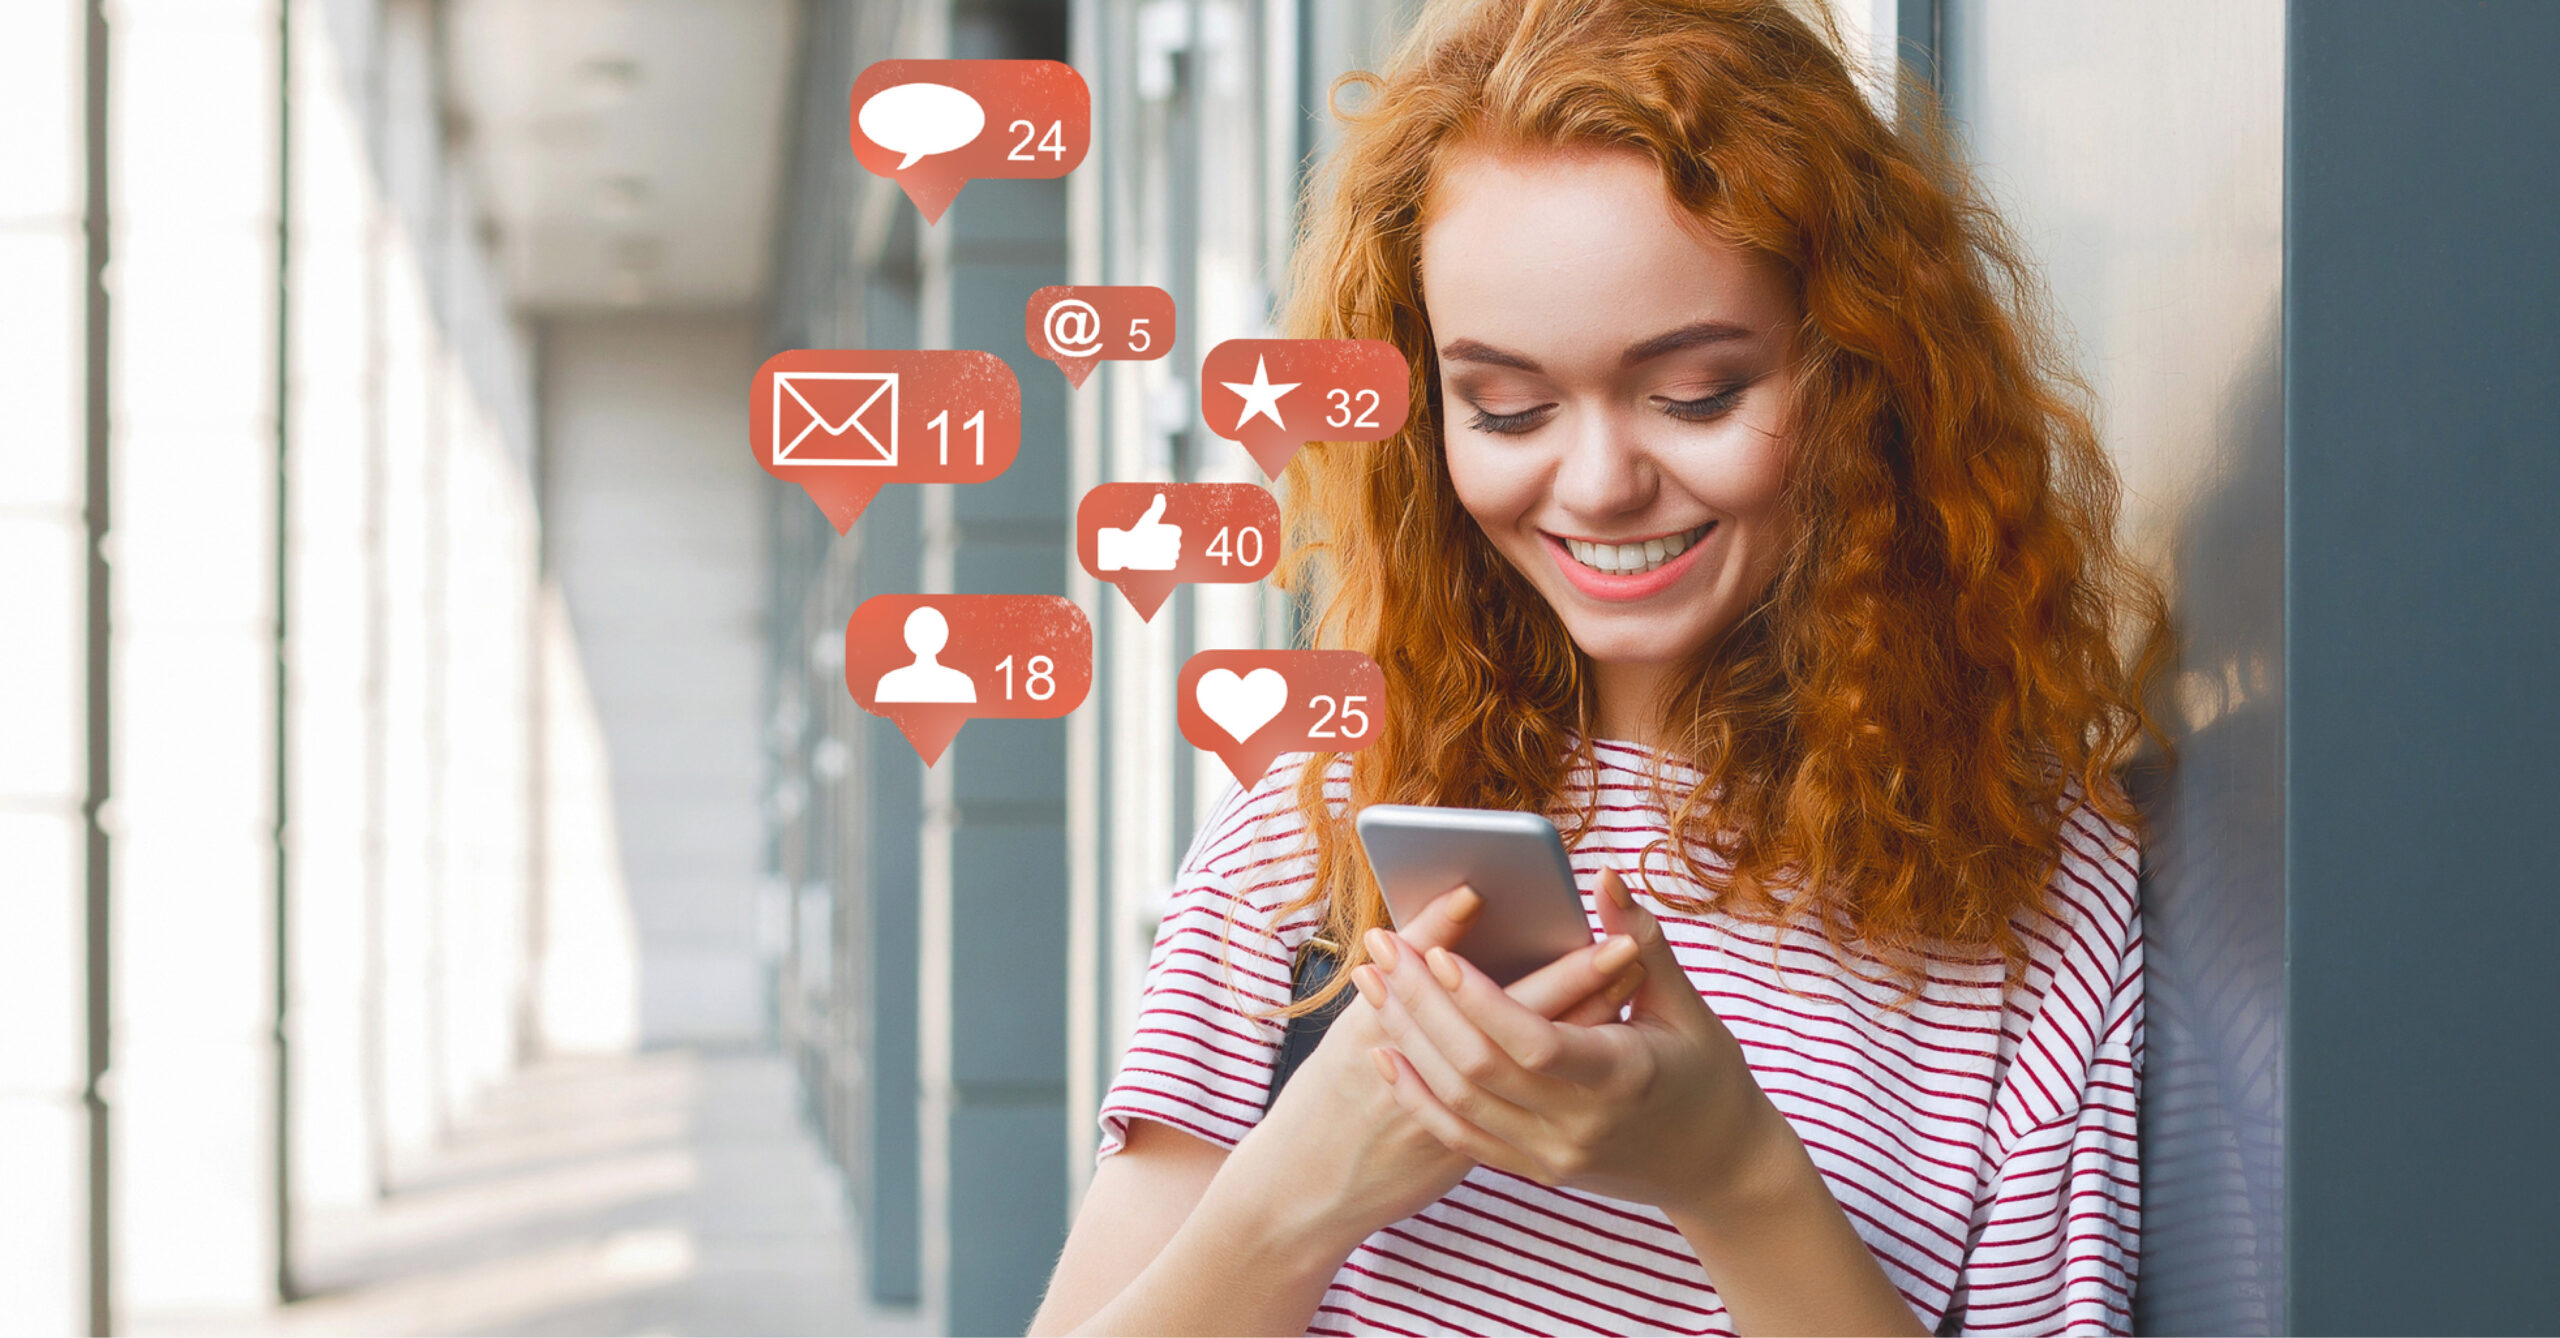 Why You Should Ramp Up Social Media Marketing This Summer